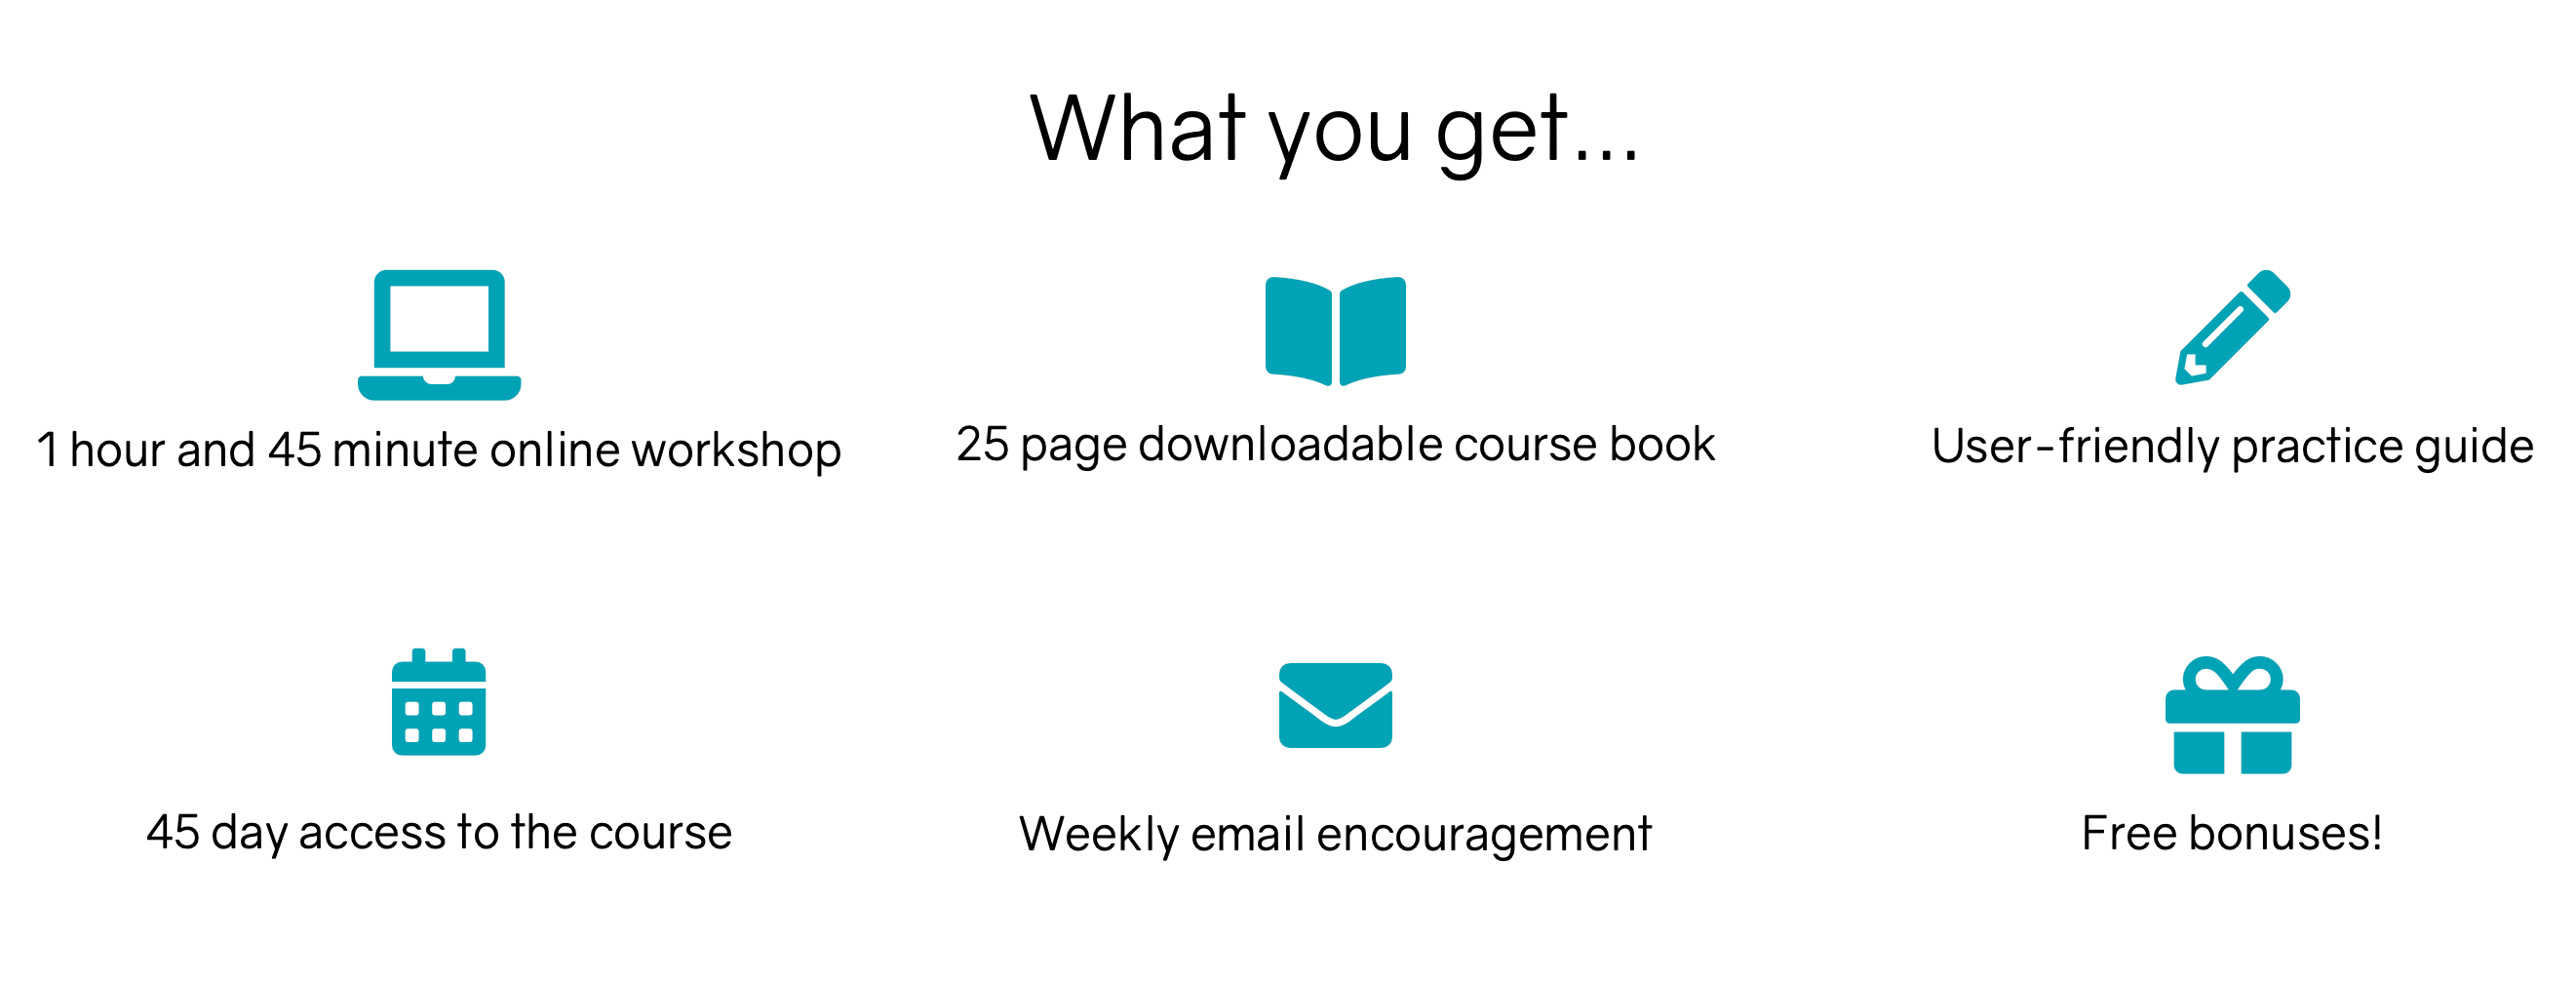 What you get in the course: 1 hour and 45 minute online workshop, 25 page downloadable course book, user-friendly practice guide, 45 day access to the course, weekly email encouragement, free bonuses